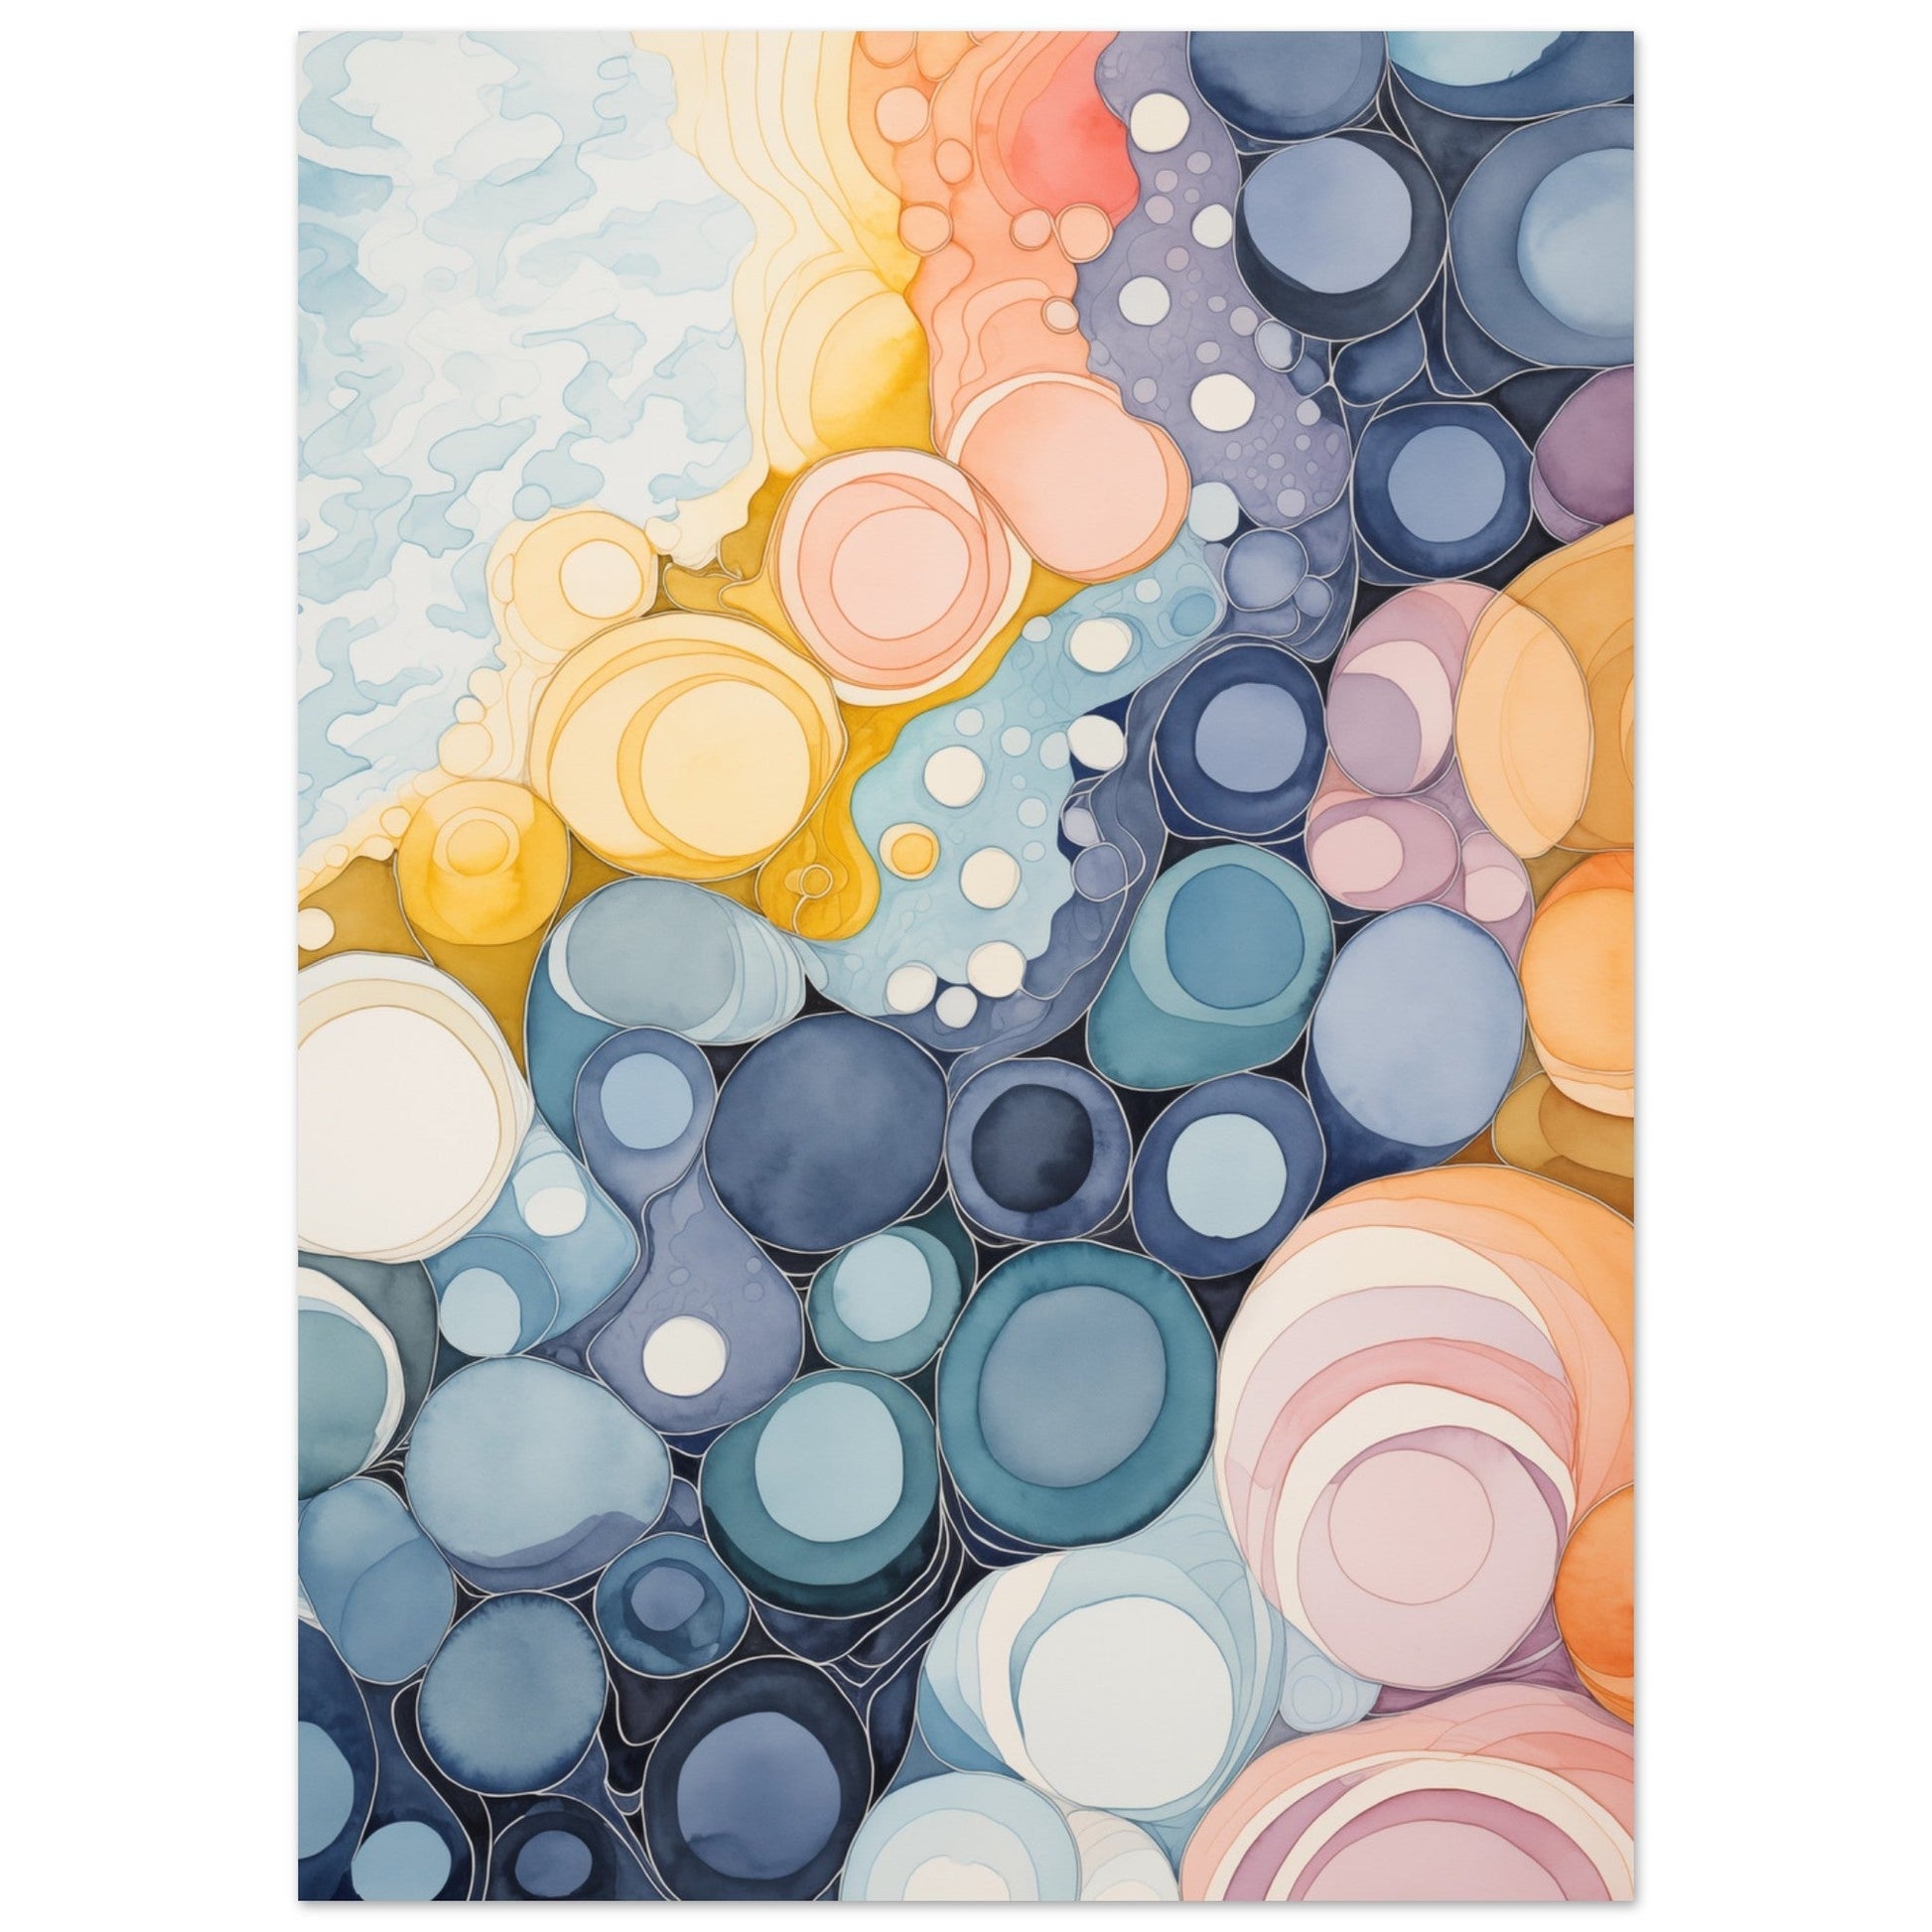 A watercolor painting of Chromatic Whirls, perfect for decorating your home as a Pop Art Poster Wall Art.